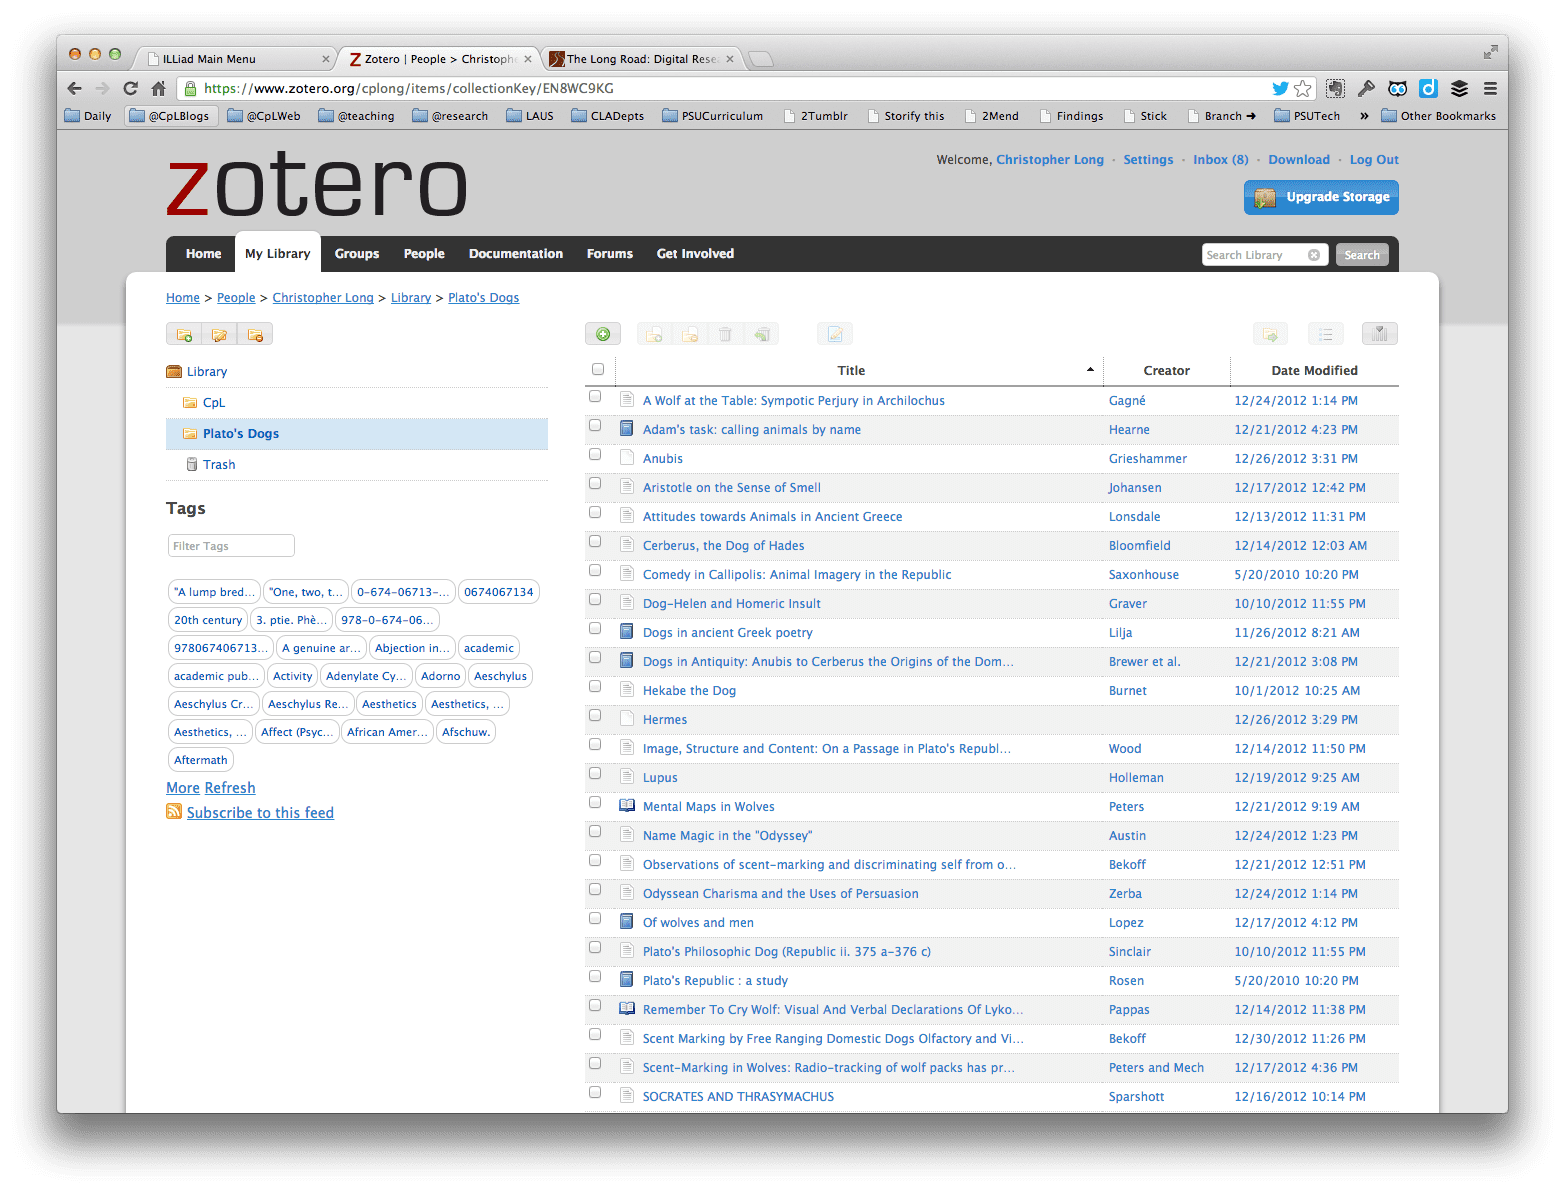 Research Cycle Returns to Zotero